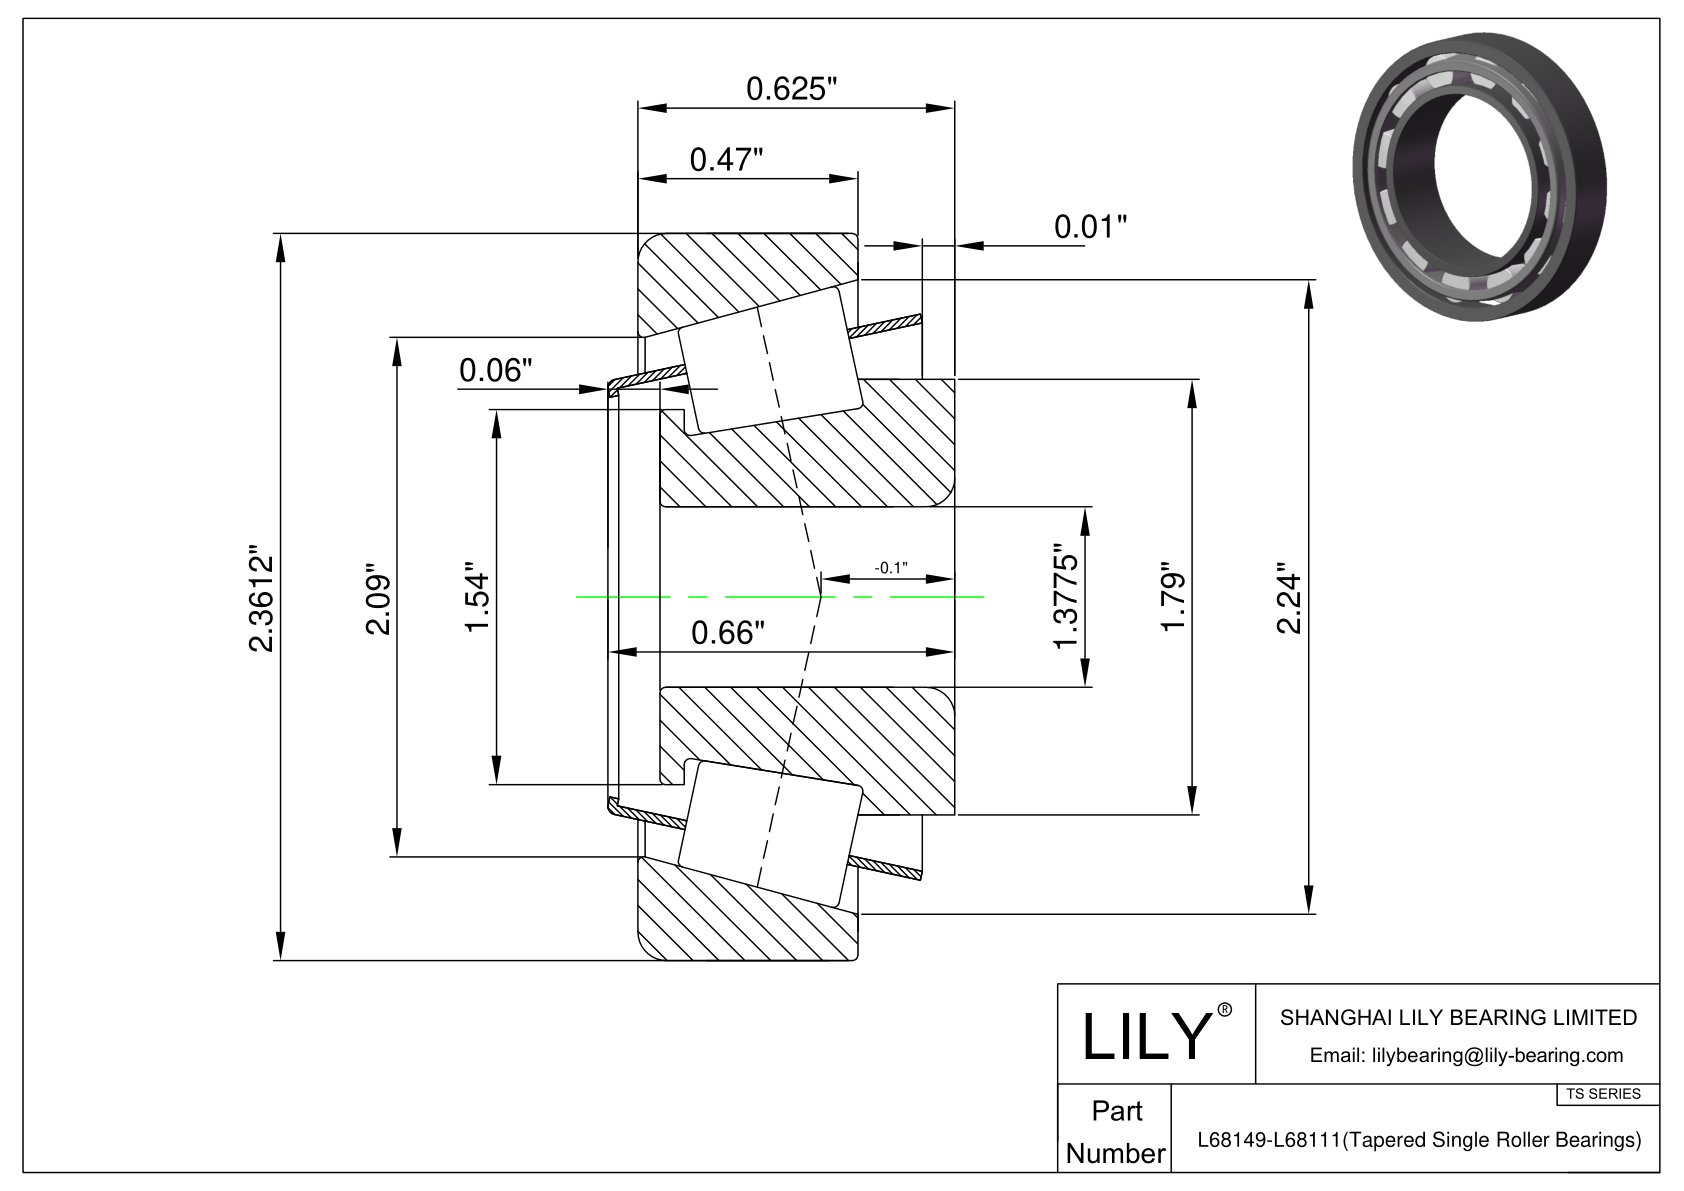 L68149-L68111 TS (Tapered Single Roller Bearings) (Imperial) cad drawing